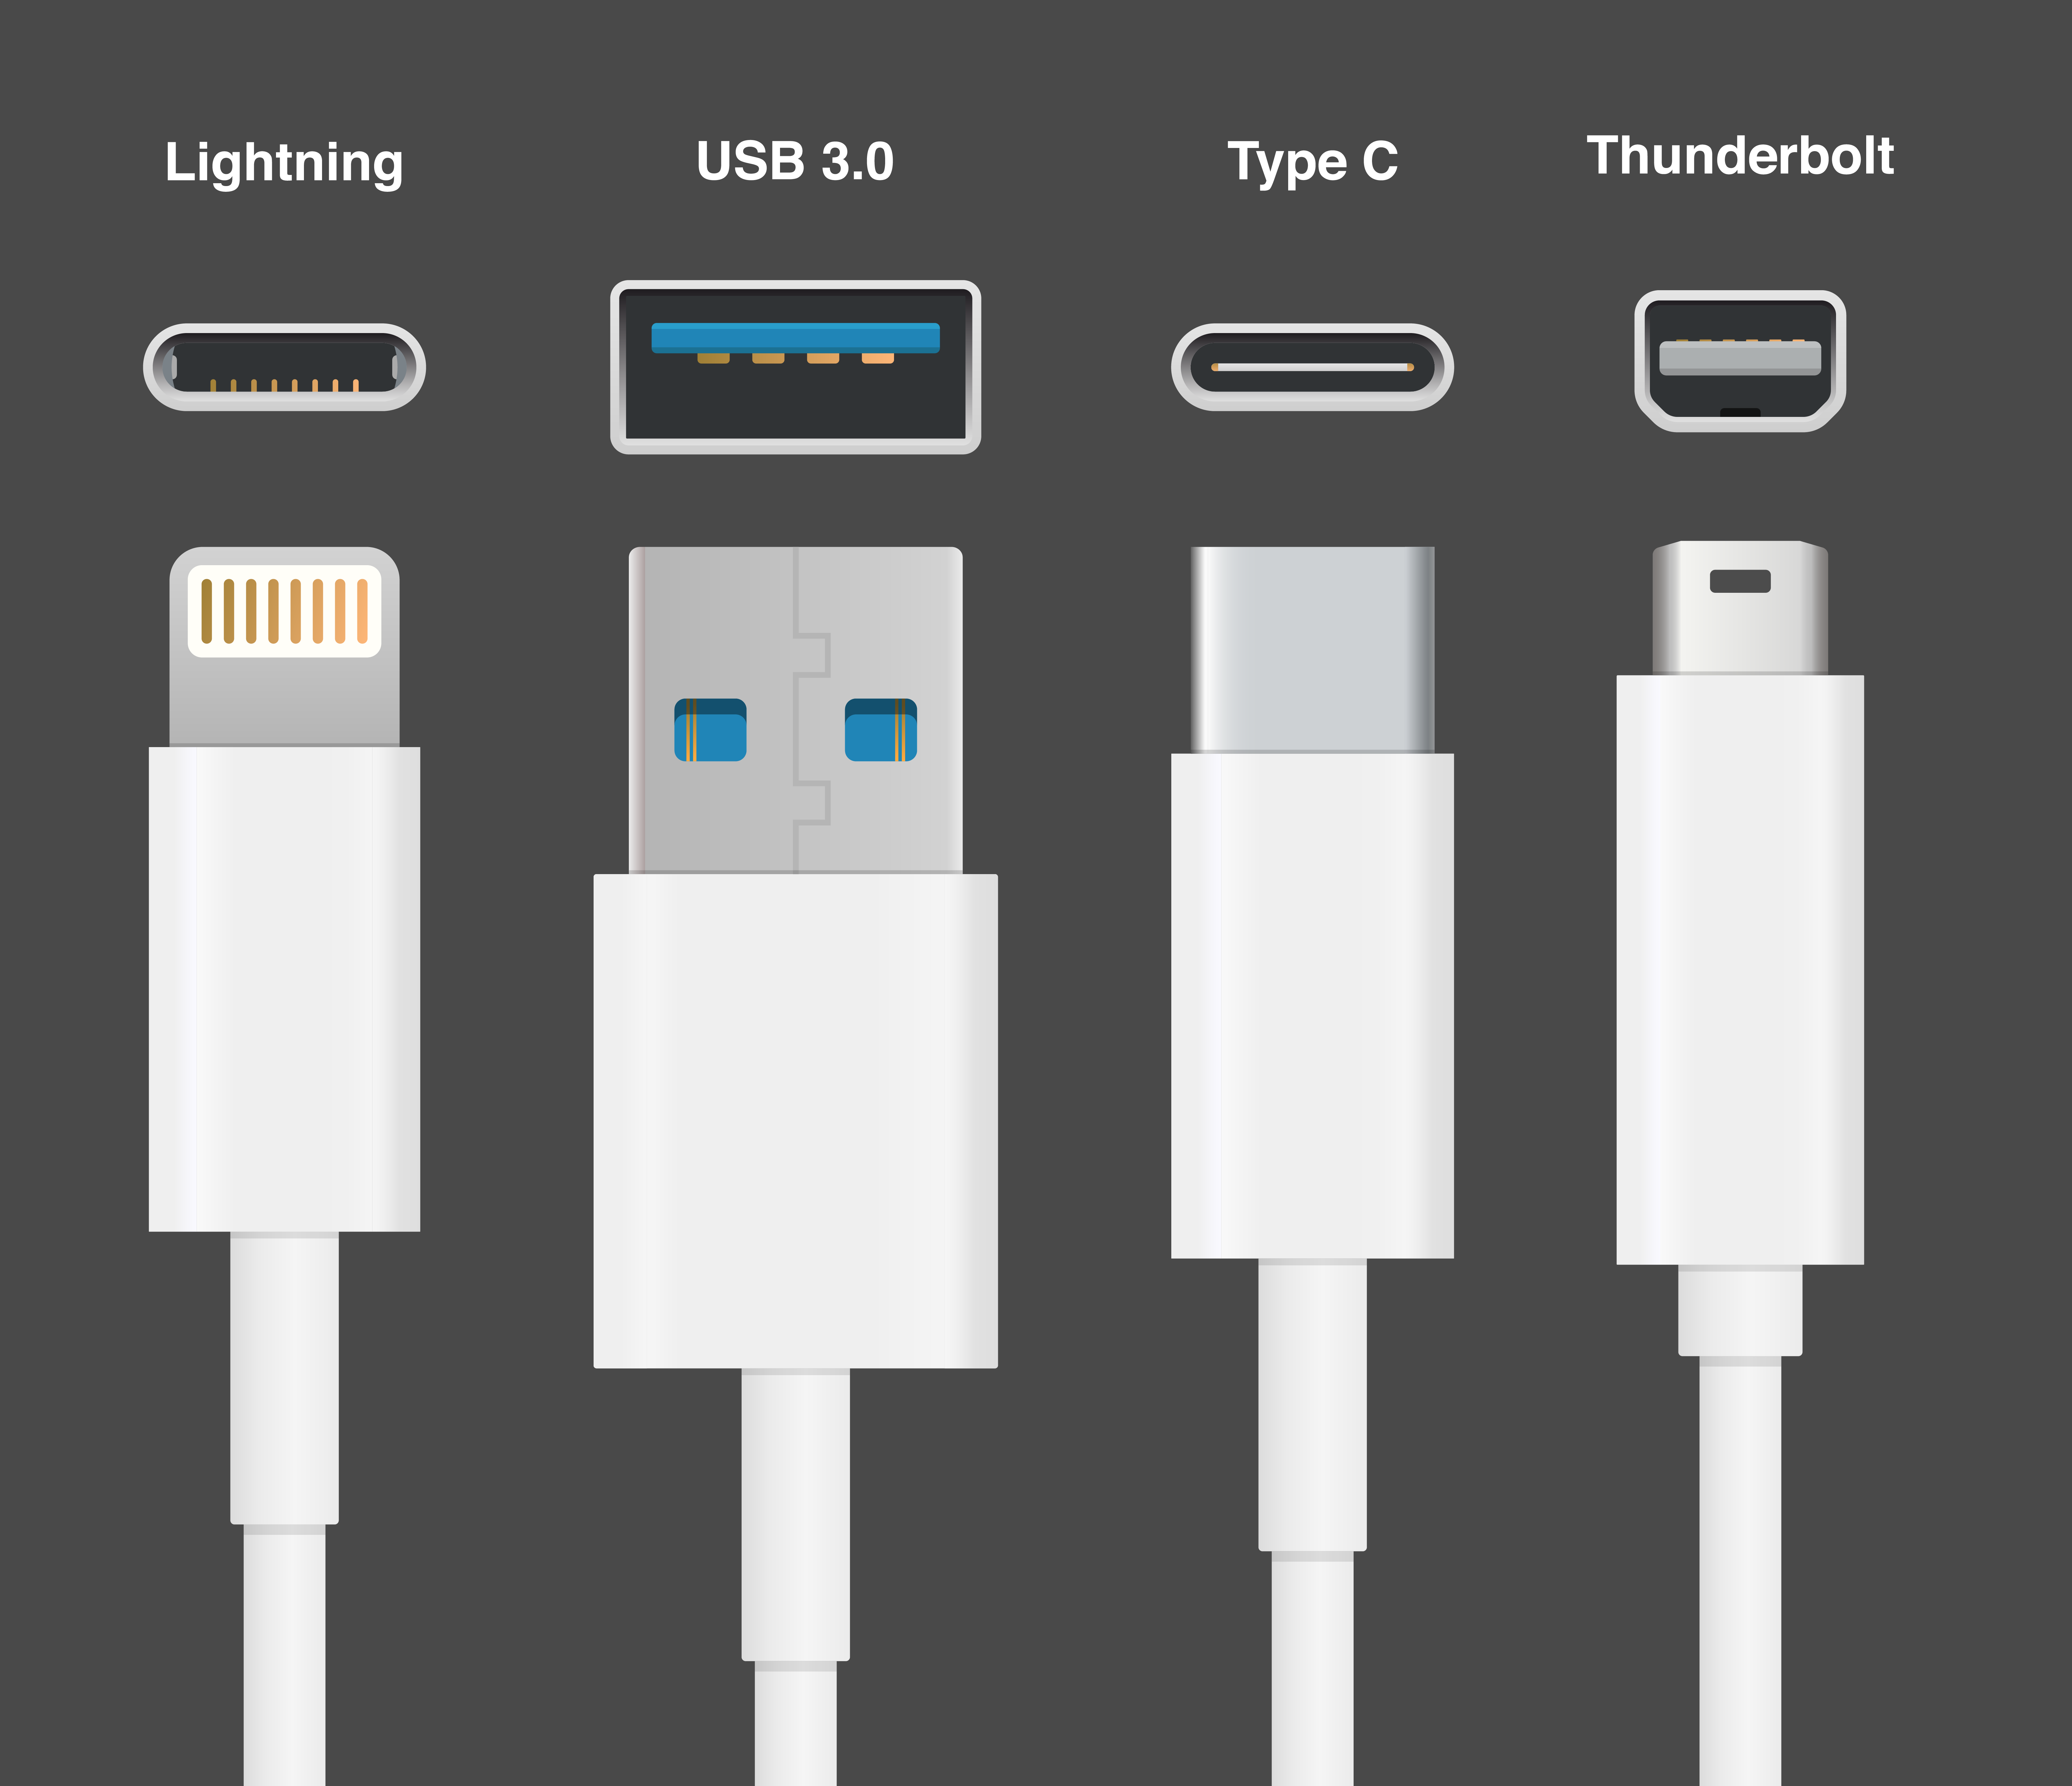 What's the Difference Between Thunderbolt 3 and USB-C?